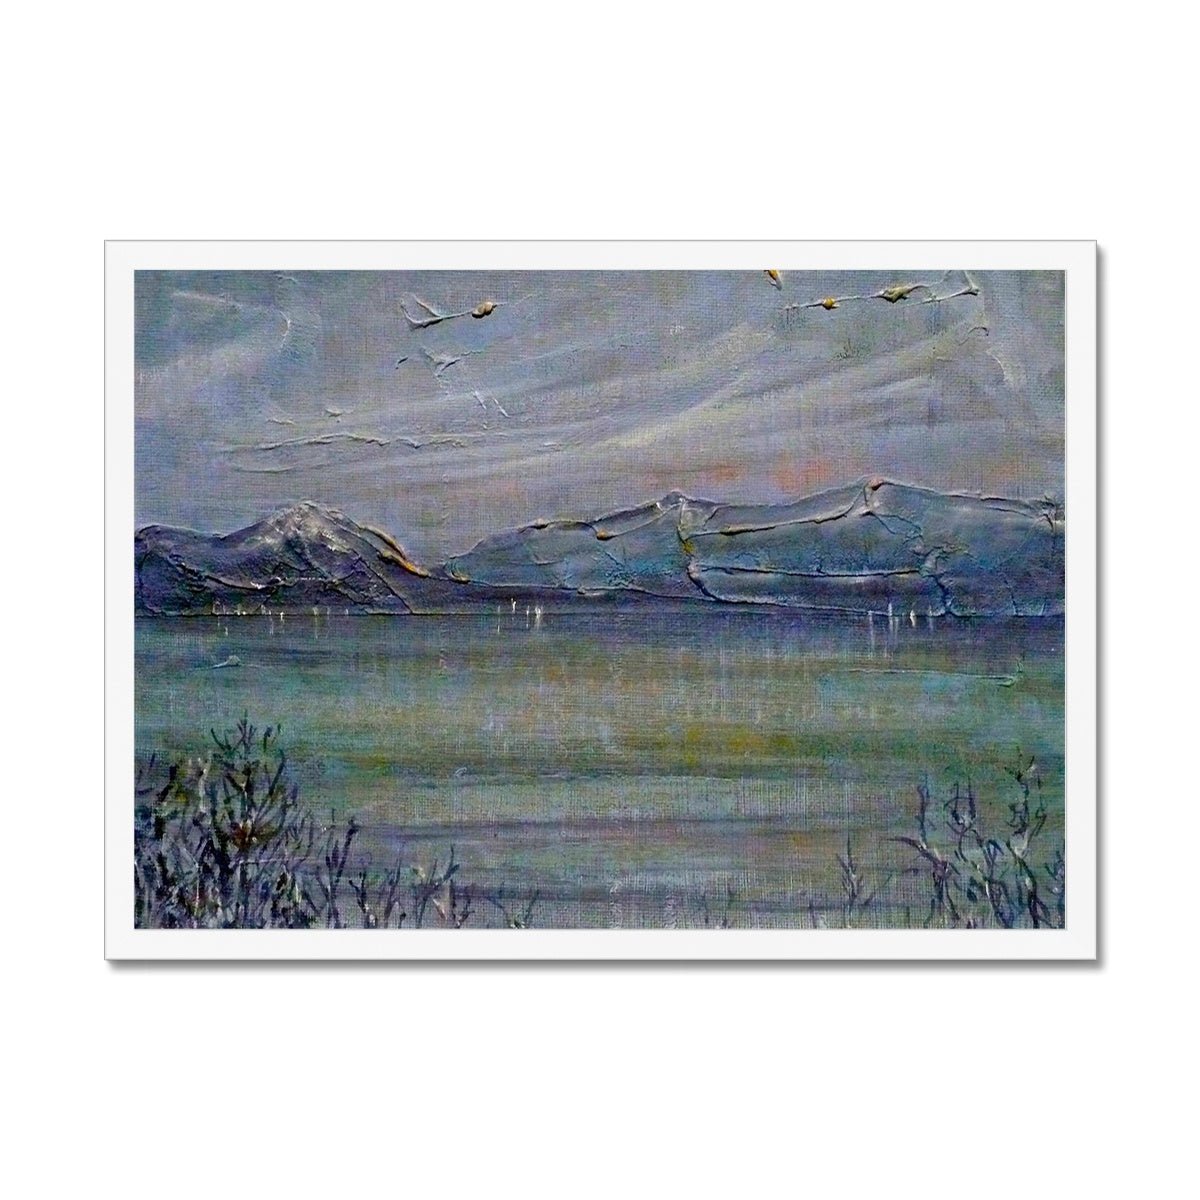 Loch Morlich Moonlight Painting | Framed Prints From Scotland-Framed Prints-Scottish Lochs & Mountains Art Gallery-A2 Landscape-White Frame-Paintings, Prints, Homeware, Art Gifts From Scotland By Scottish Artist Kevin Hunter